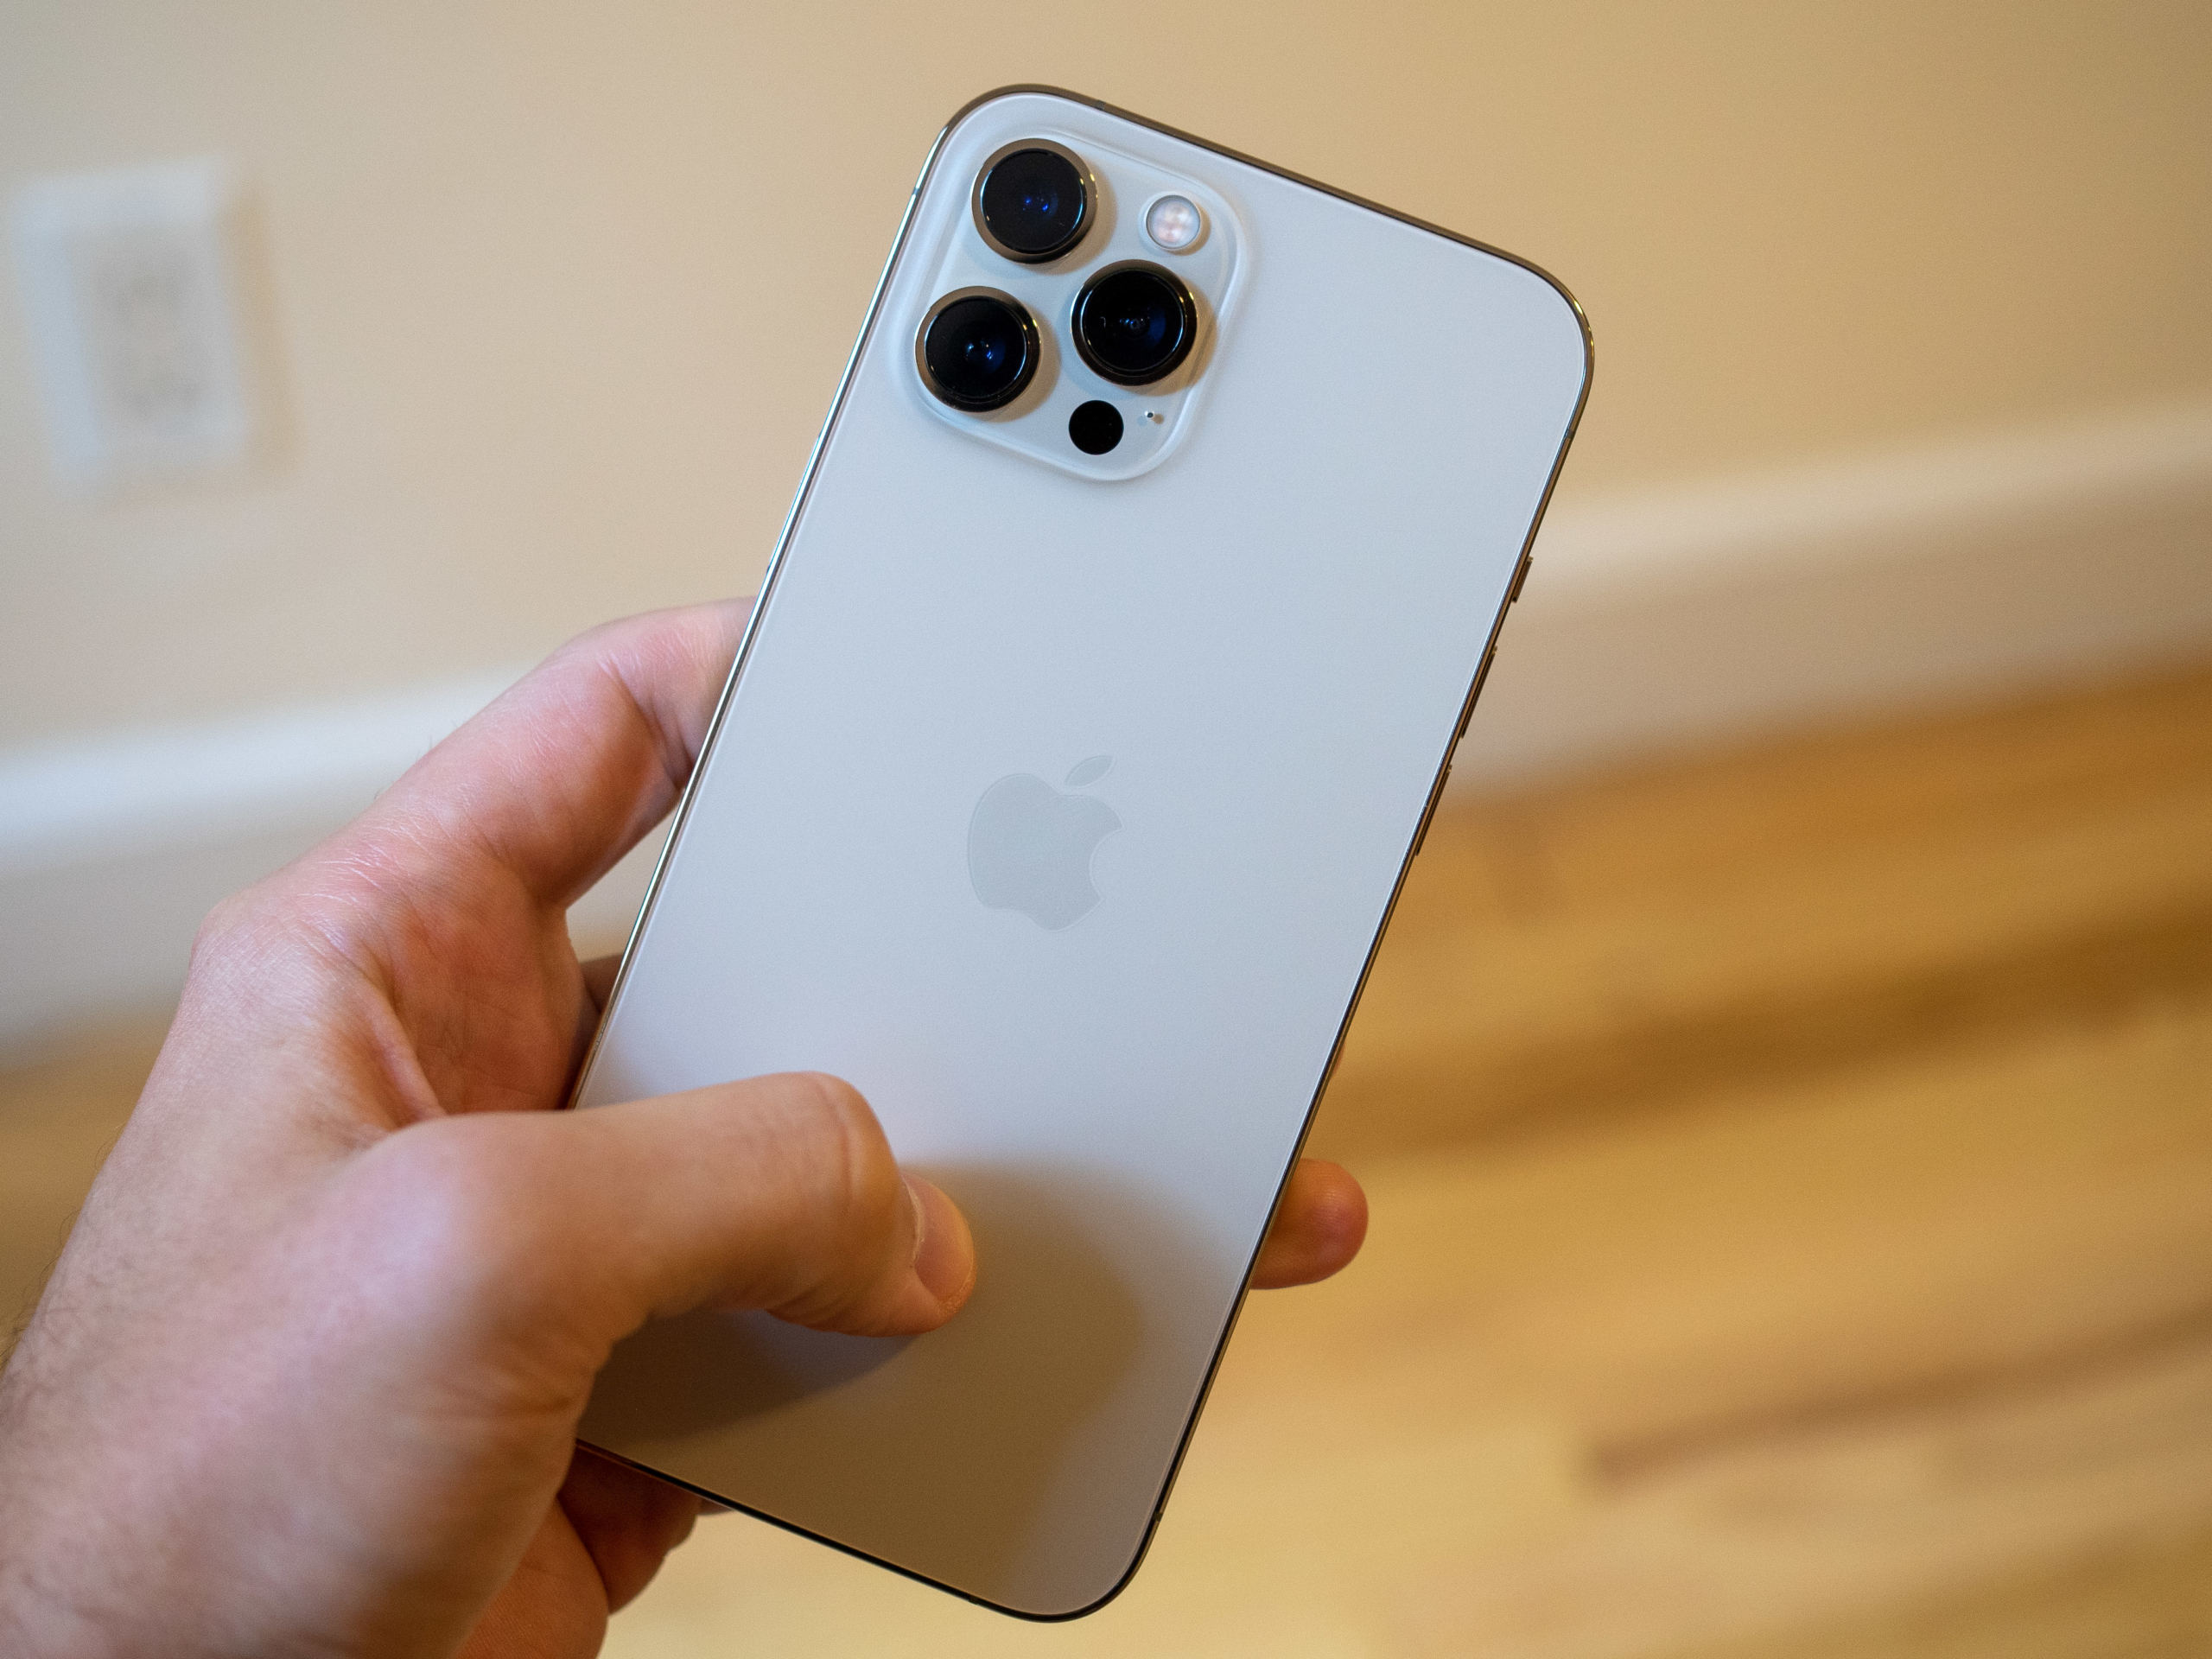 iPhone 12 Pro review: still a top choice with great specs